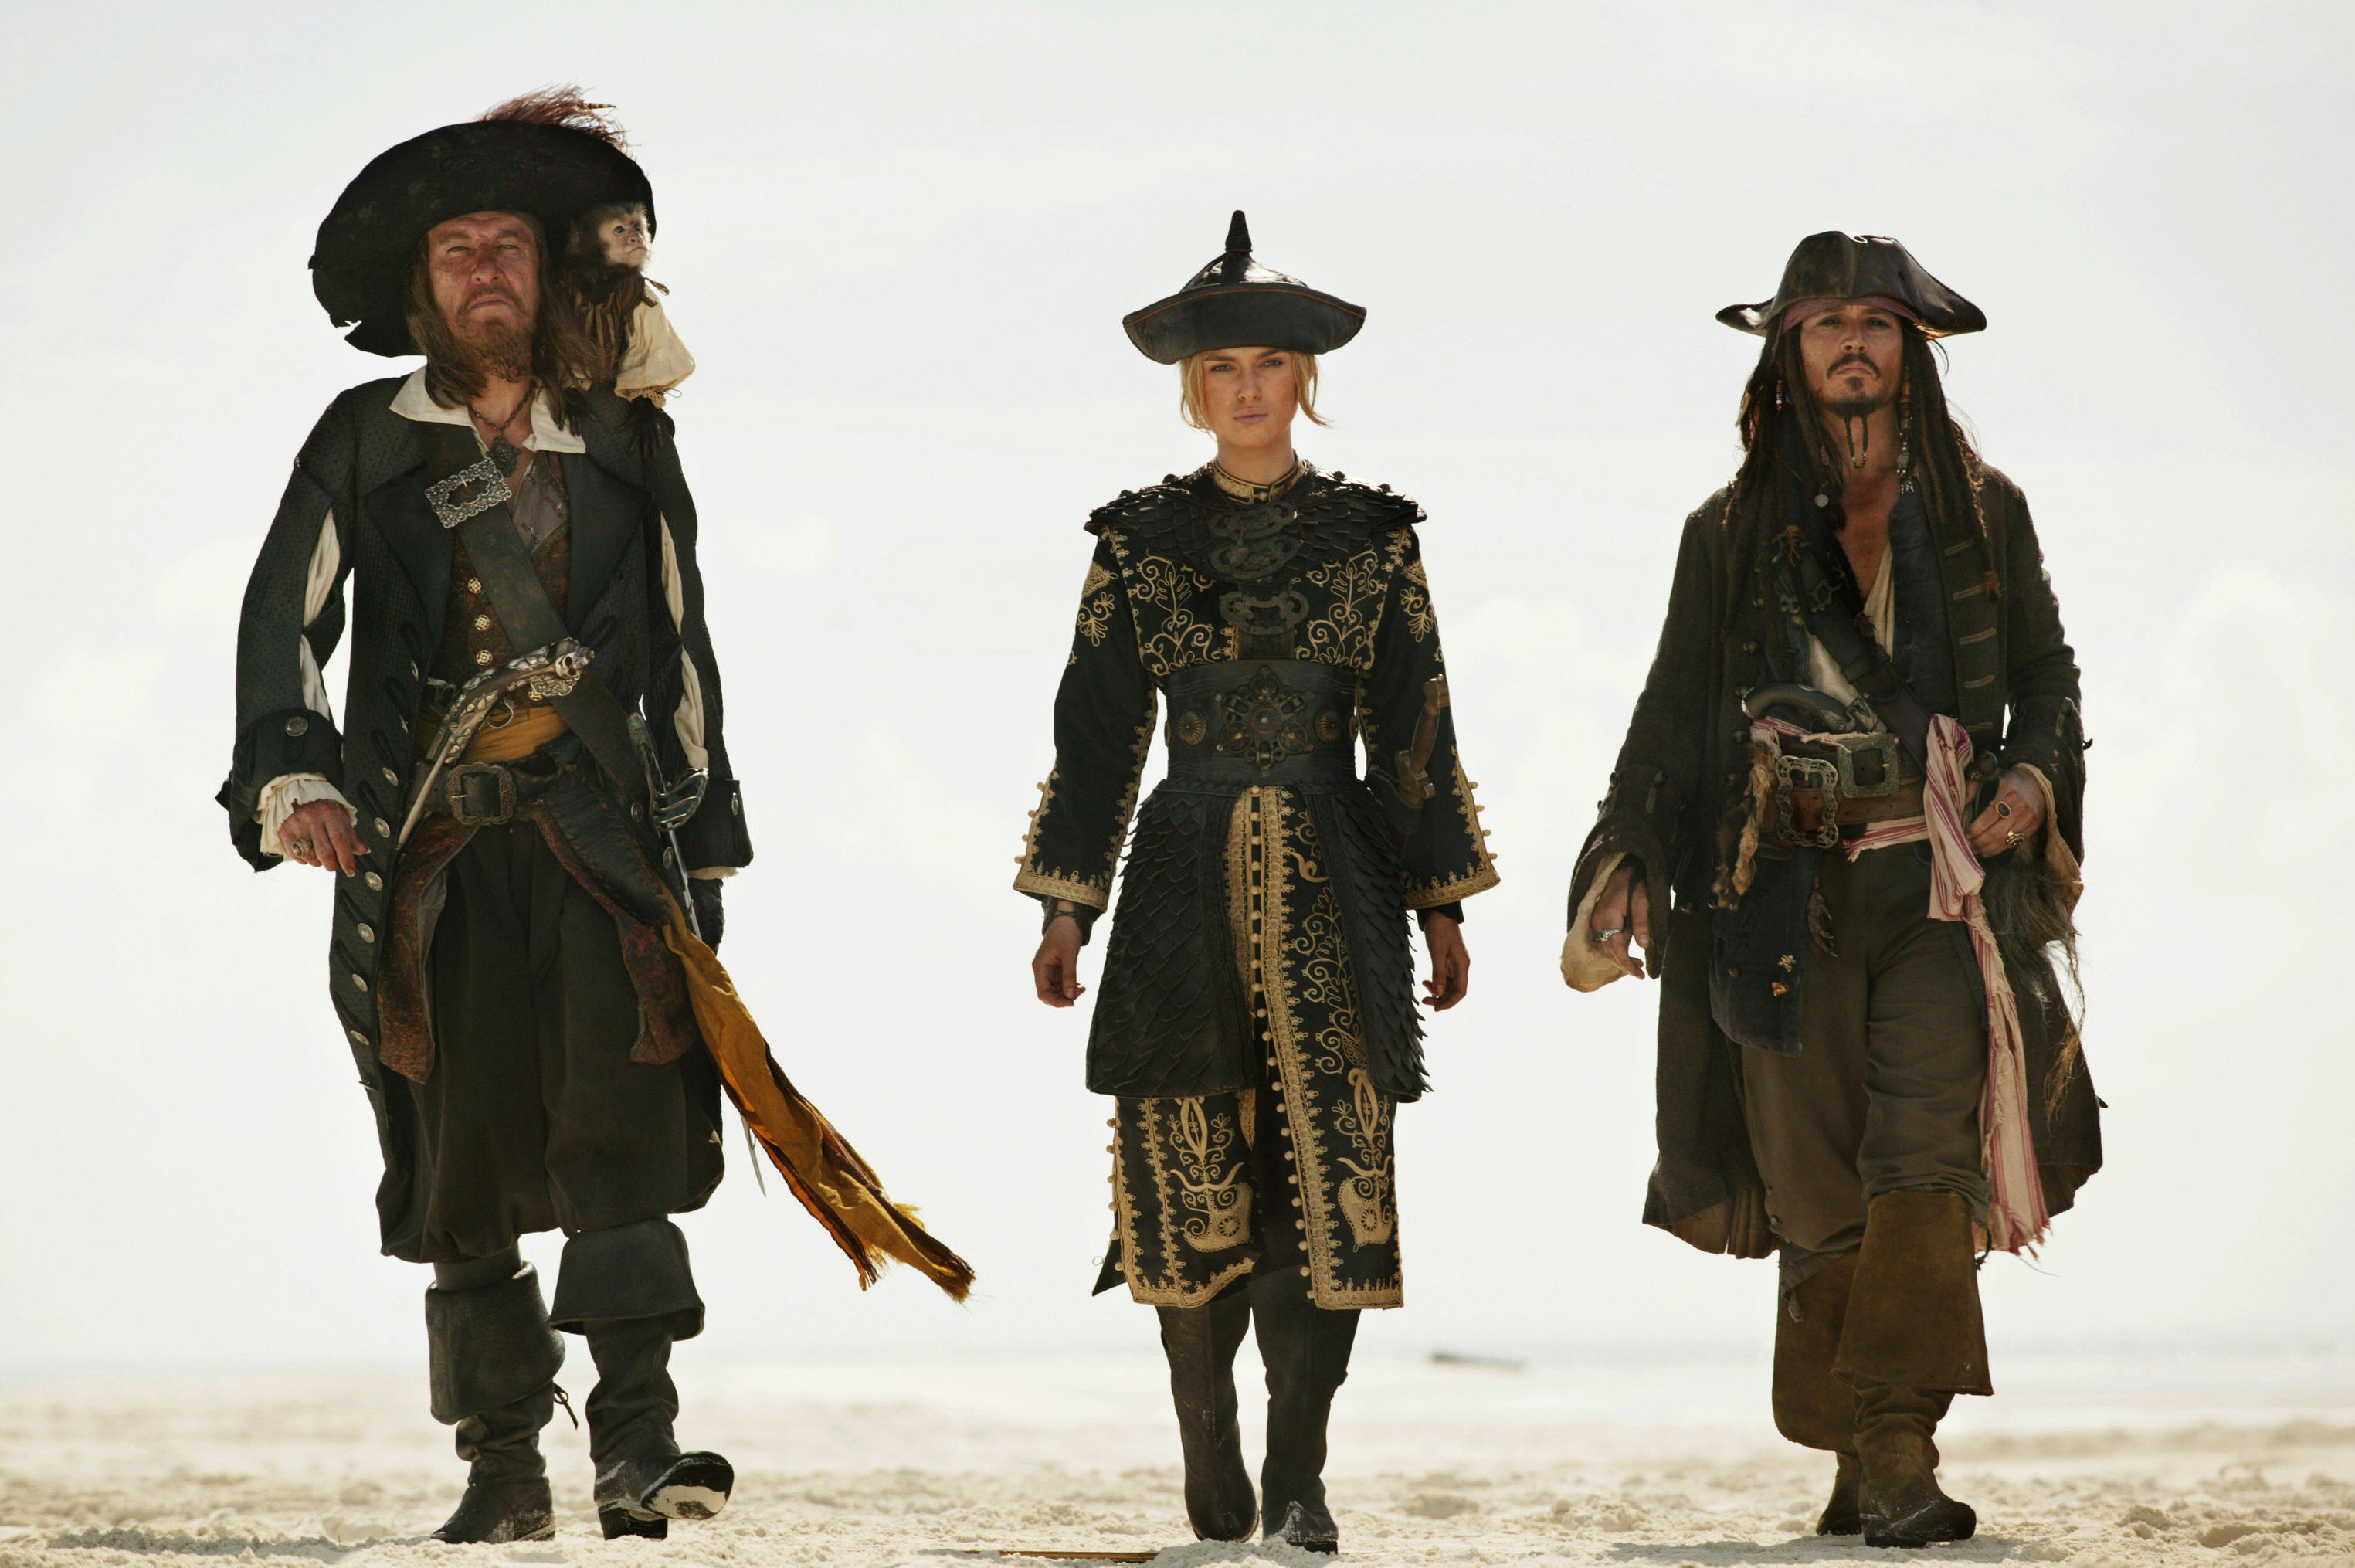 movie, pirates of the caribbean: at world's end, elizabeth swann, geoffrey rush, hector barbossa, jack sparrow, johnny depp, keira knightley, pirates of the caribbean